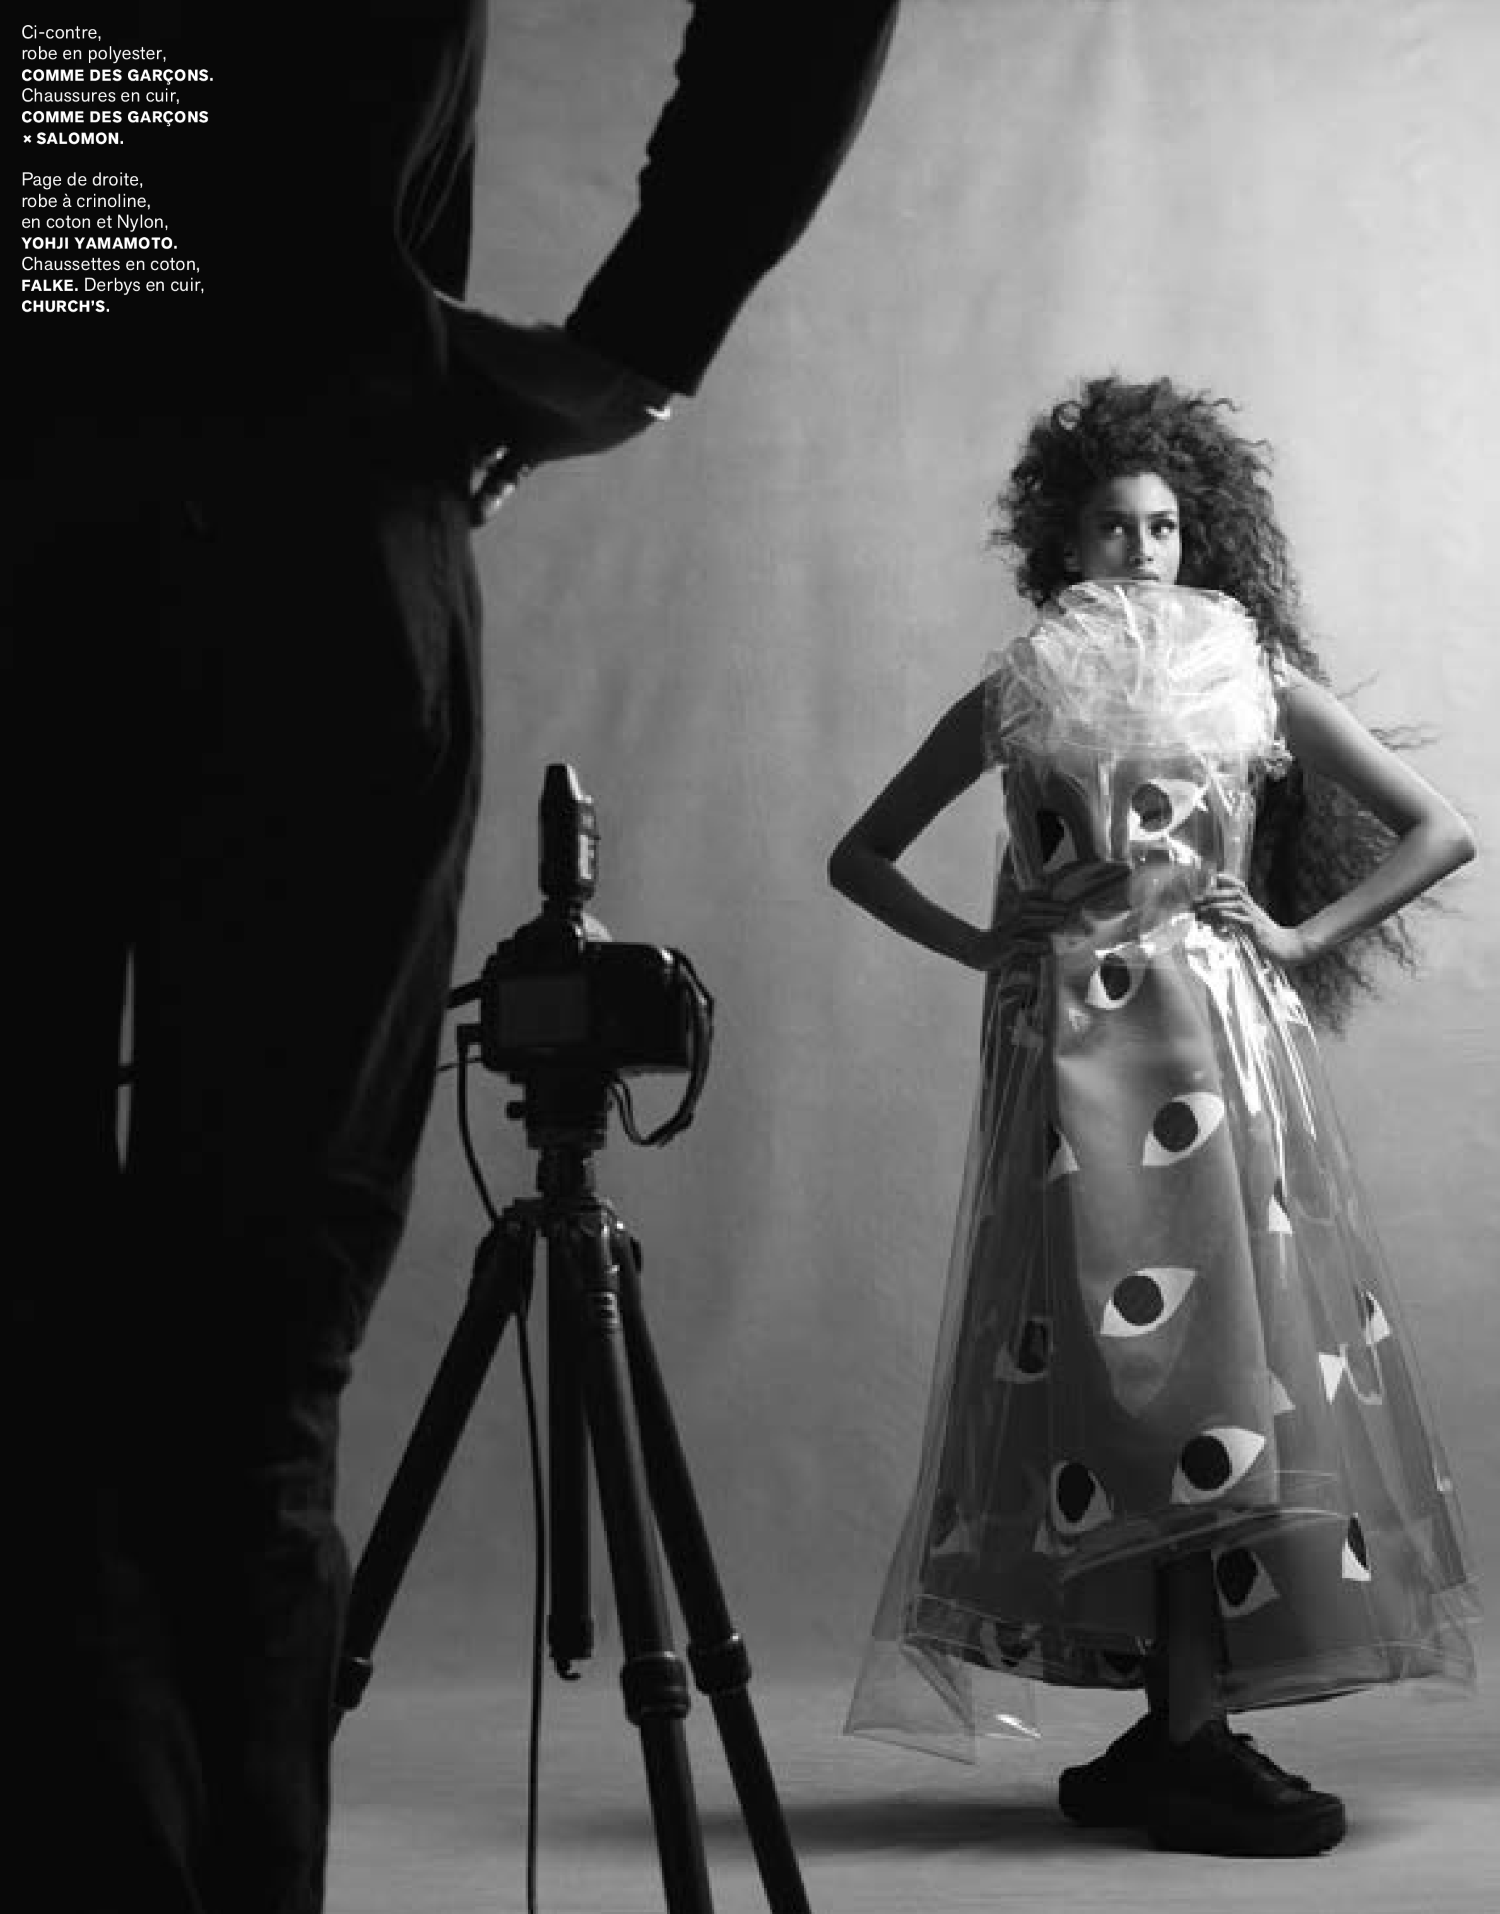 Imaan Hammam by Ethan James Green M Le Mag du Monde 2-27-21 (11).png